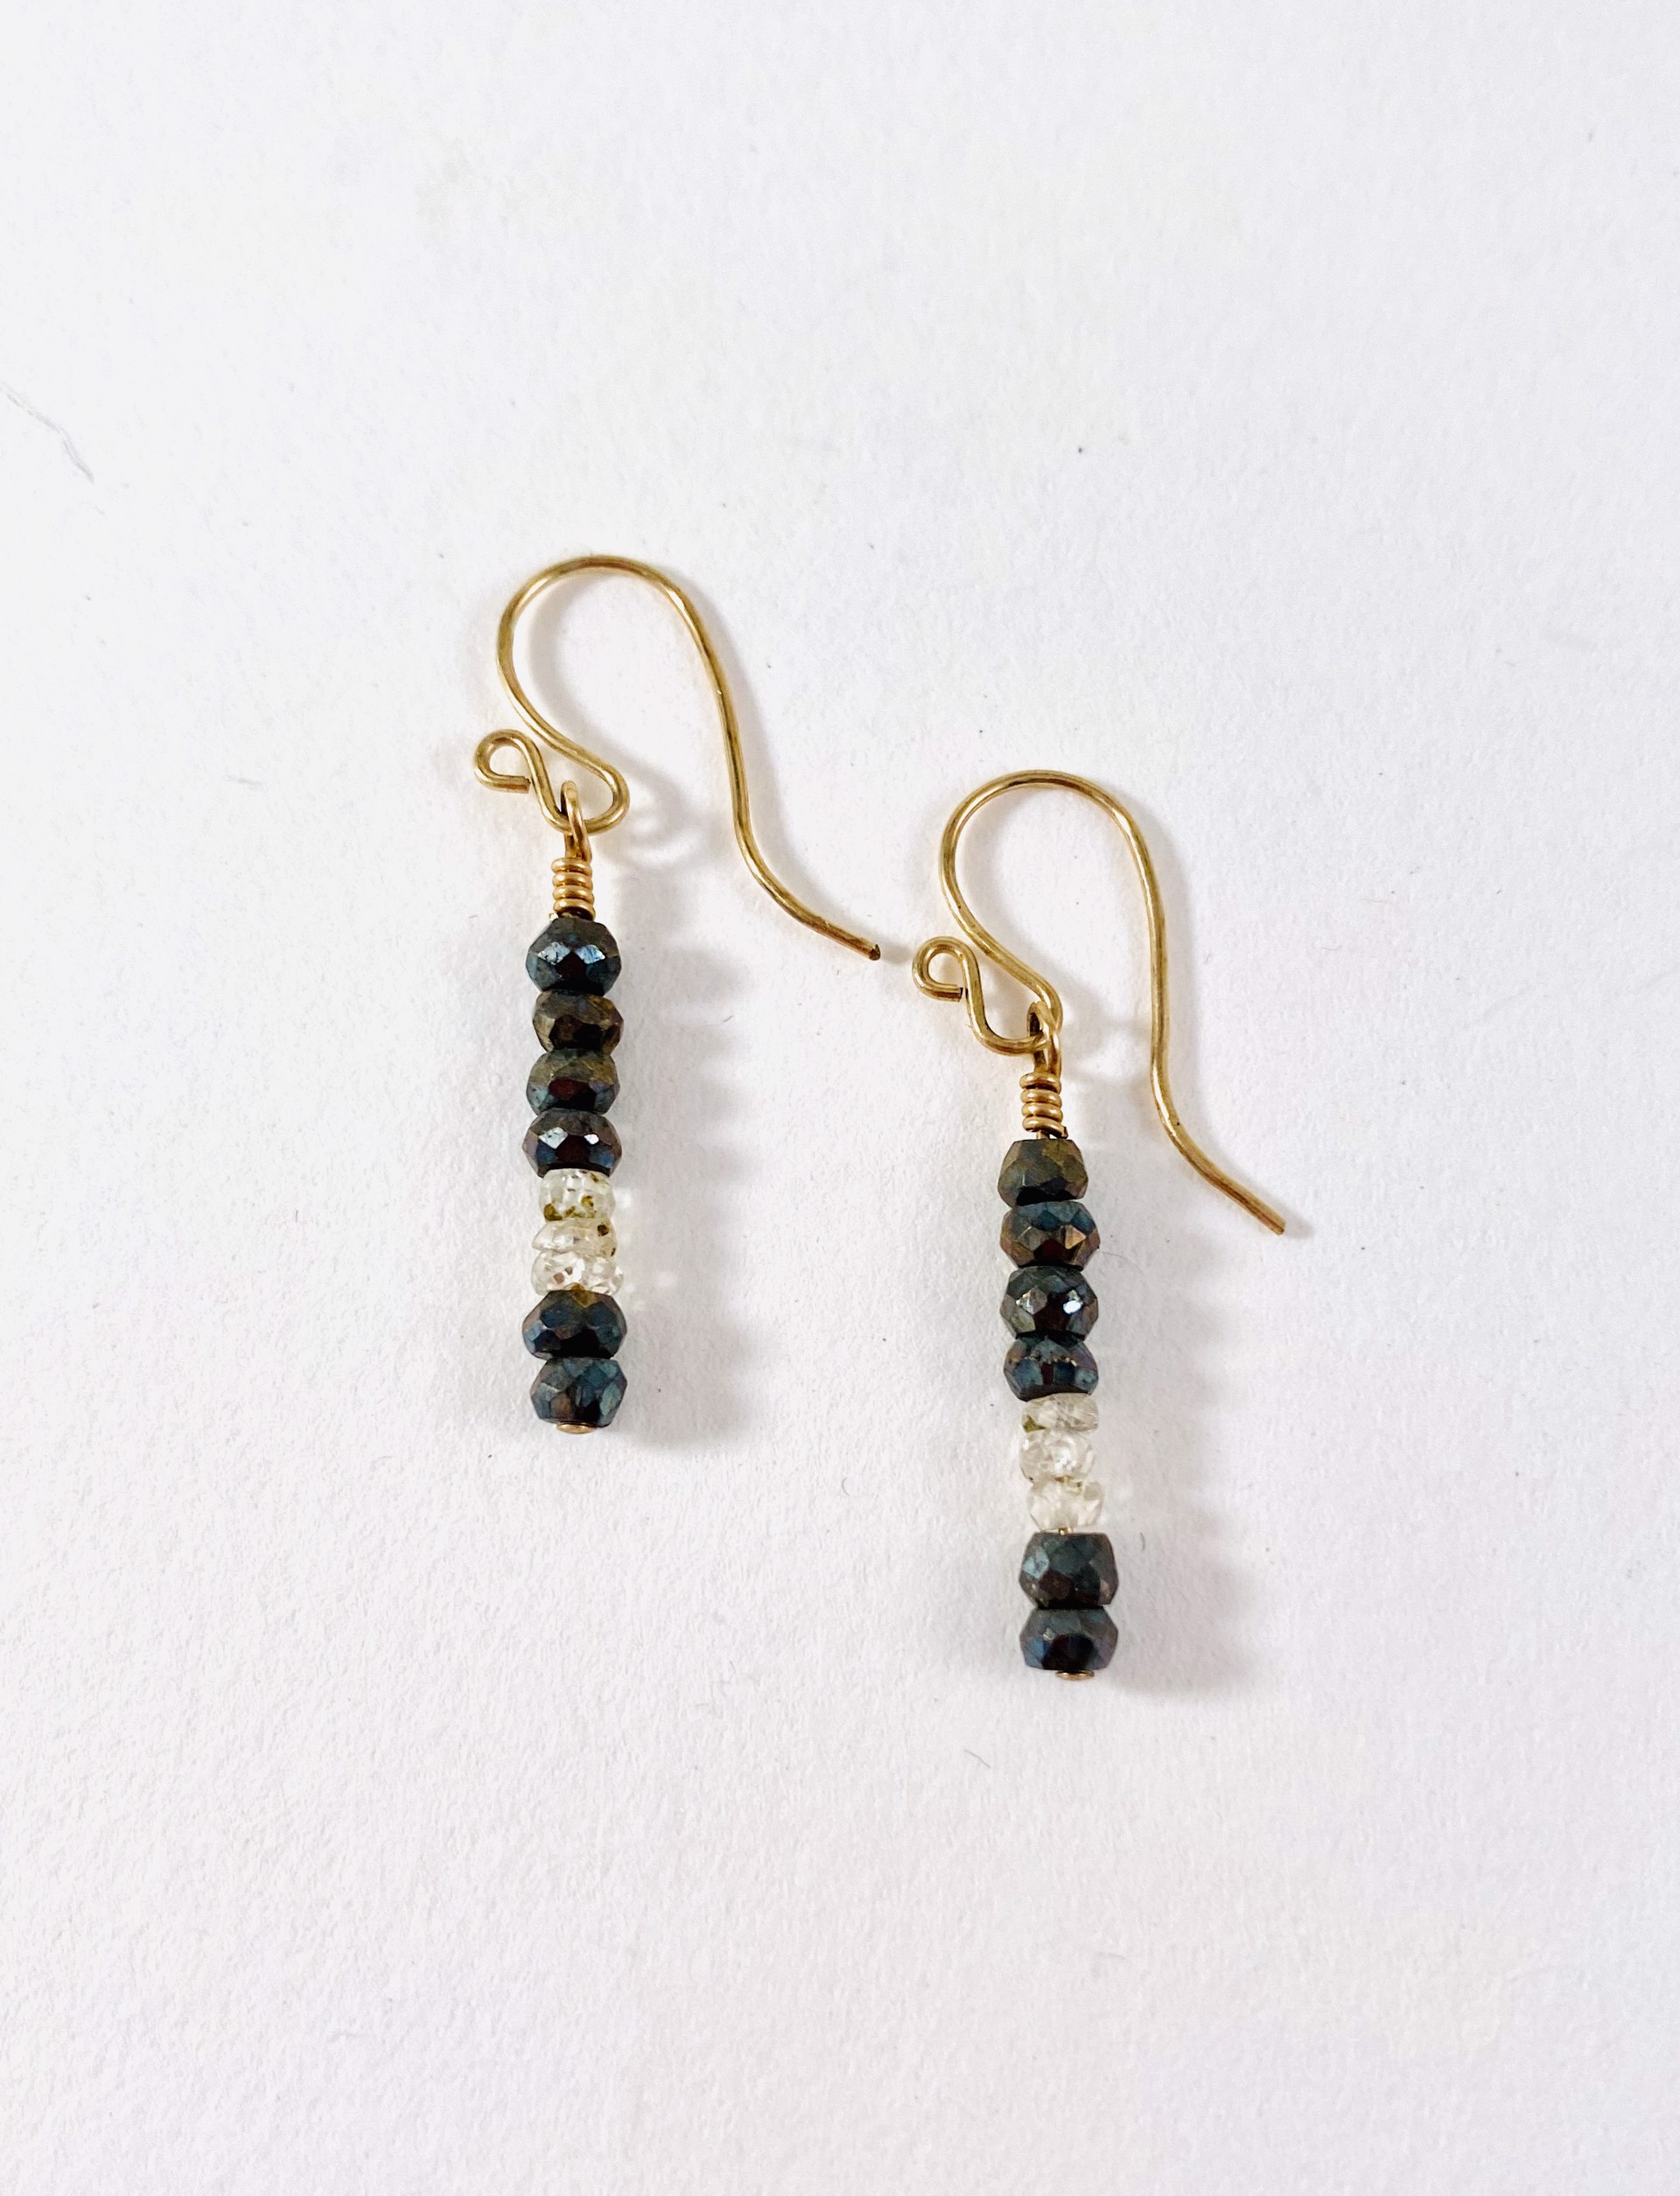 Pyrite and Champagne Zircon Earrings #28 by Shelby Lee - jewelry